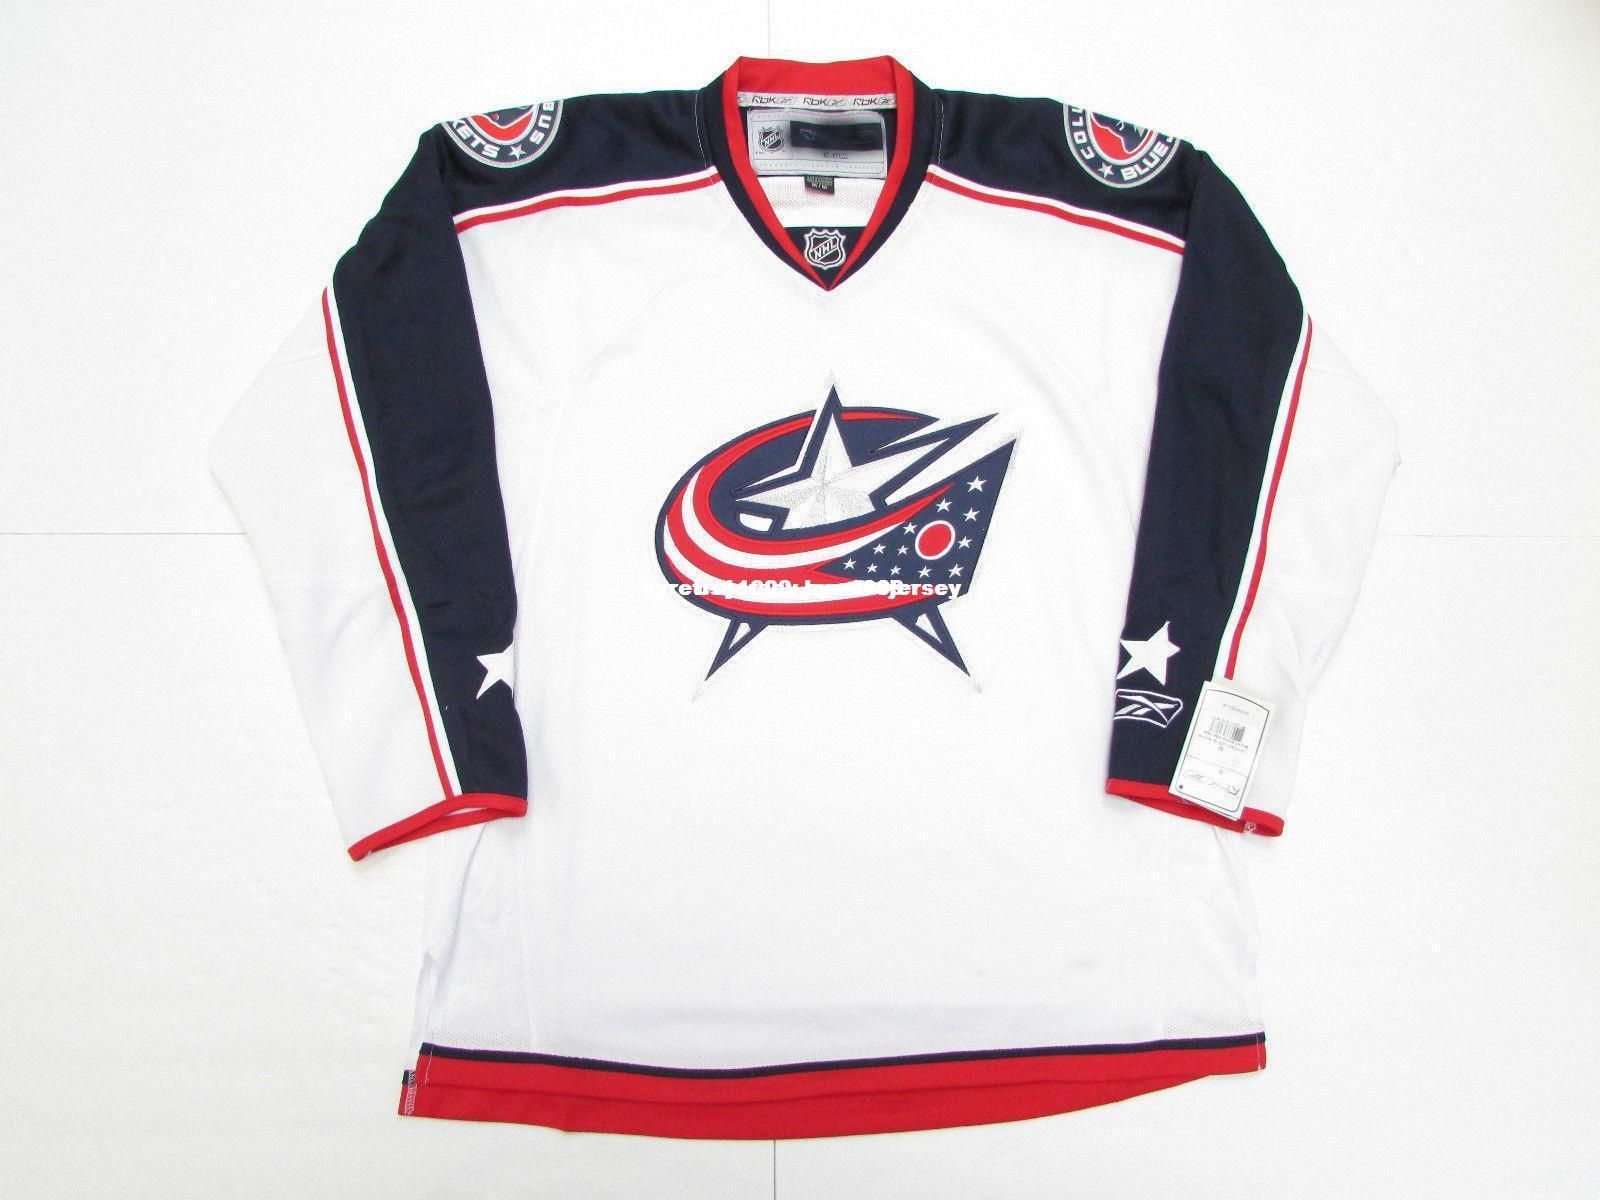 custom columbus blue jackets jersey Cheaper Than Retail Price> Buy  Clothing, Accessories and lifestyle products for women & men -